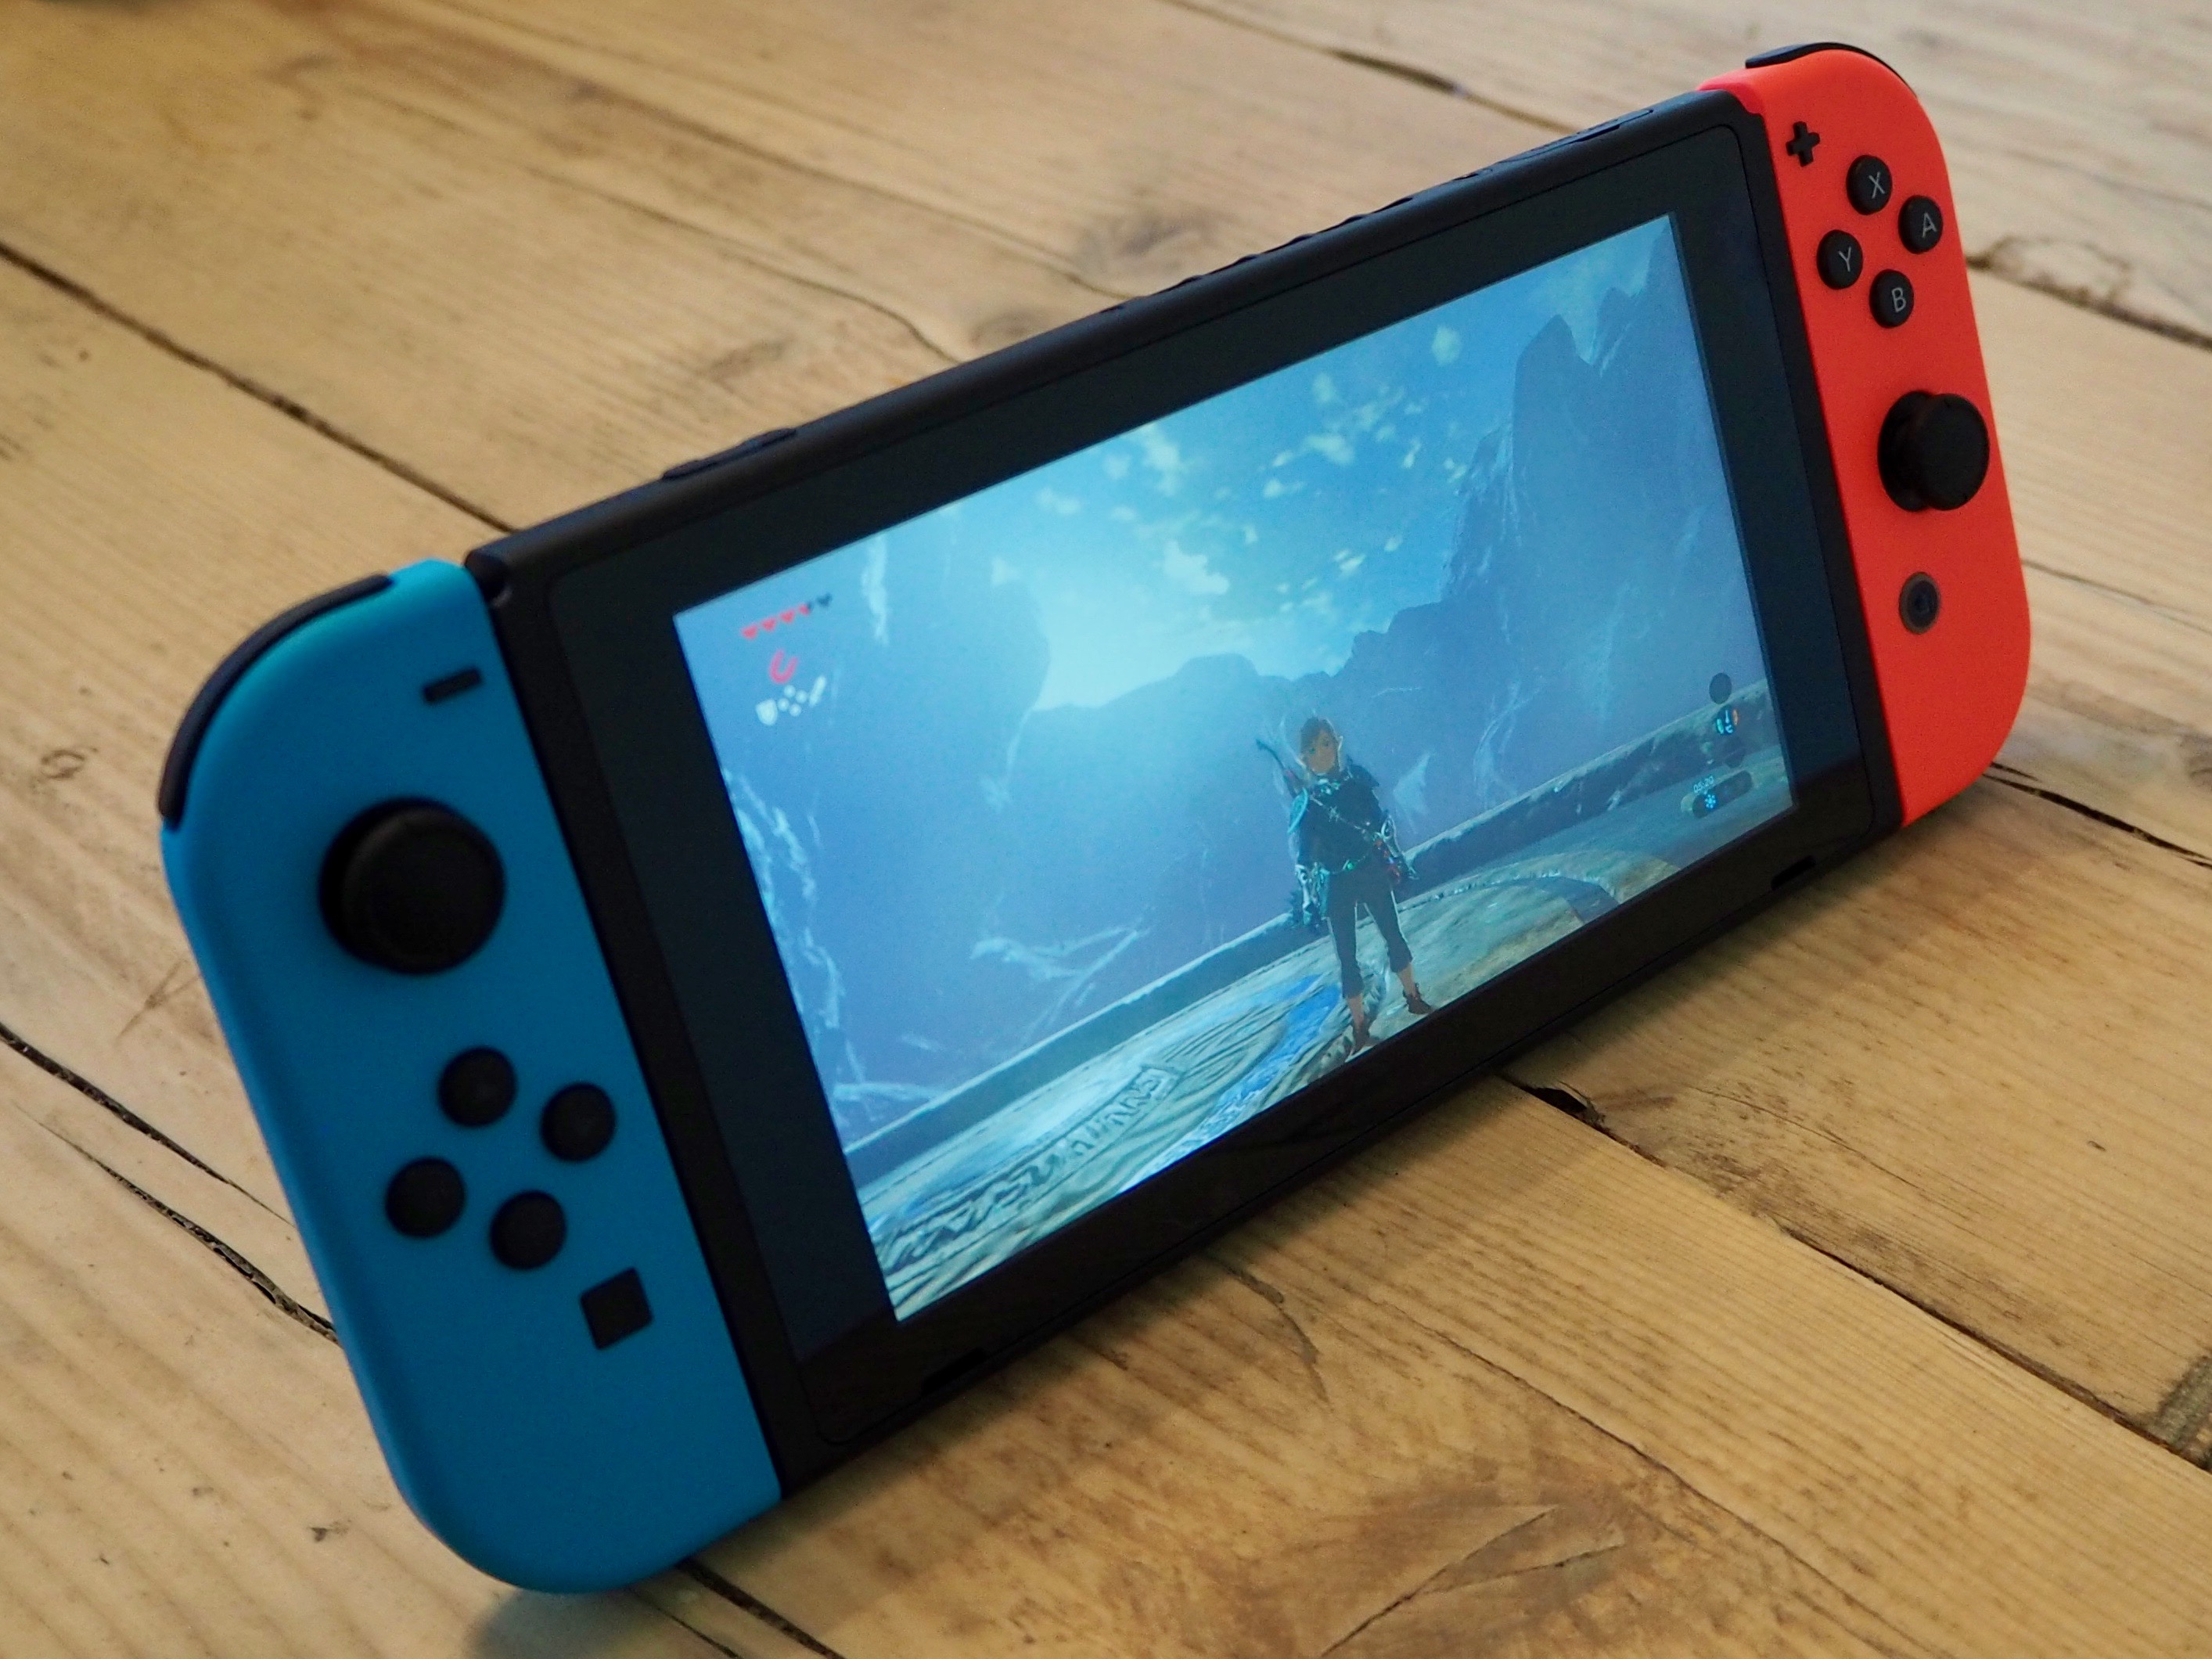 A Nintendo Switch console, showing the game The Legend of Zelda: Breath of the Wild on the screen